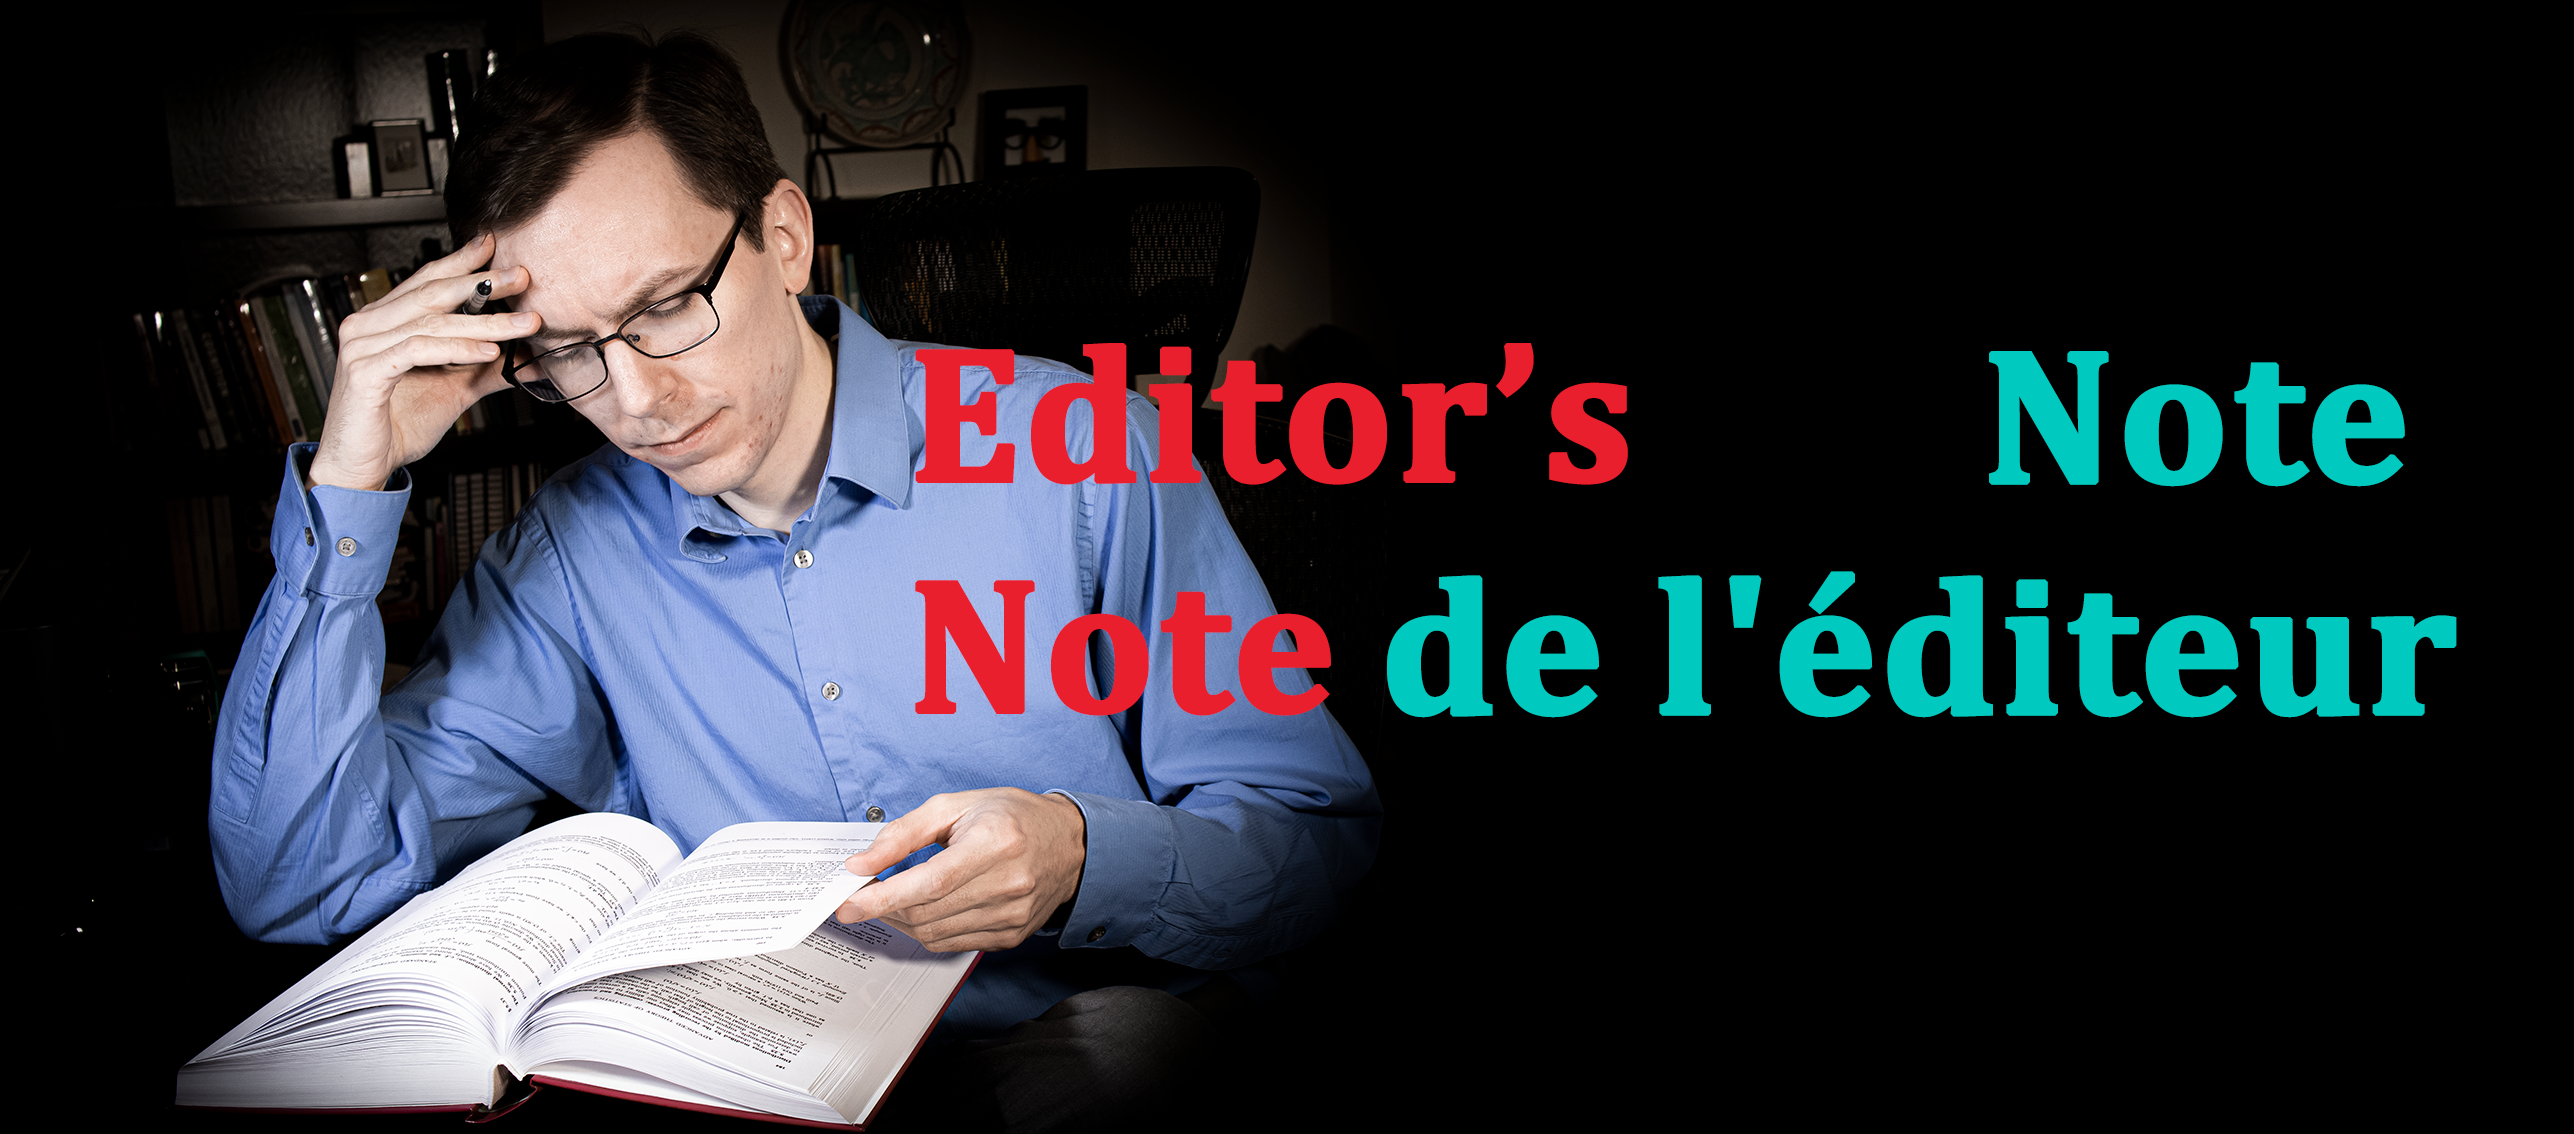 editor's note